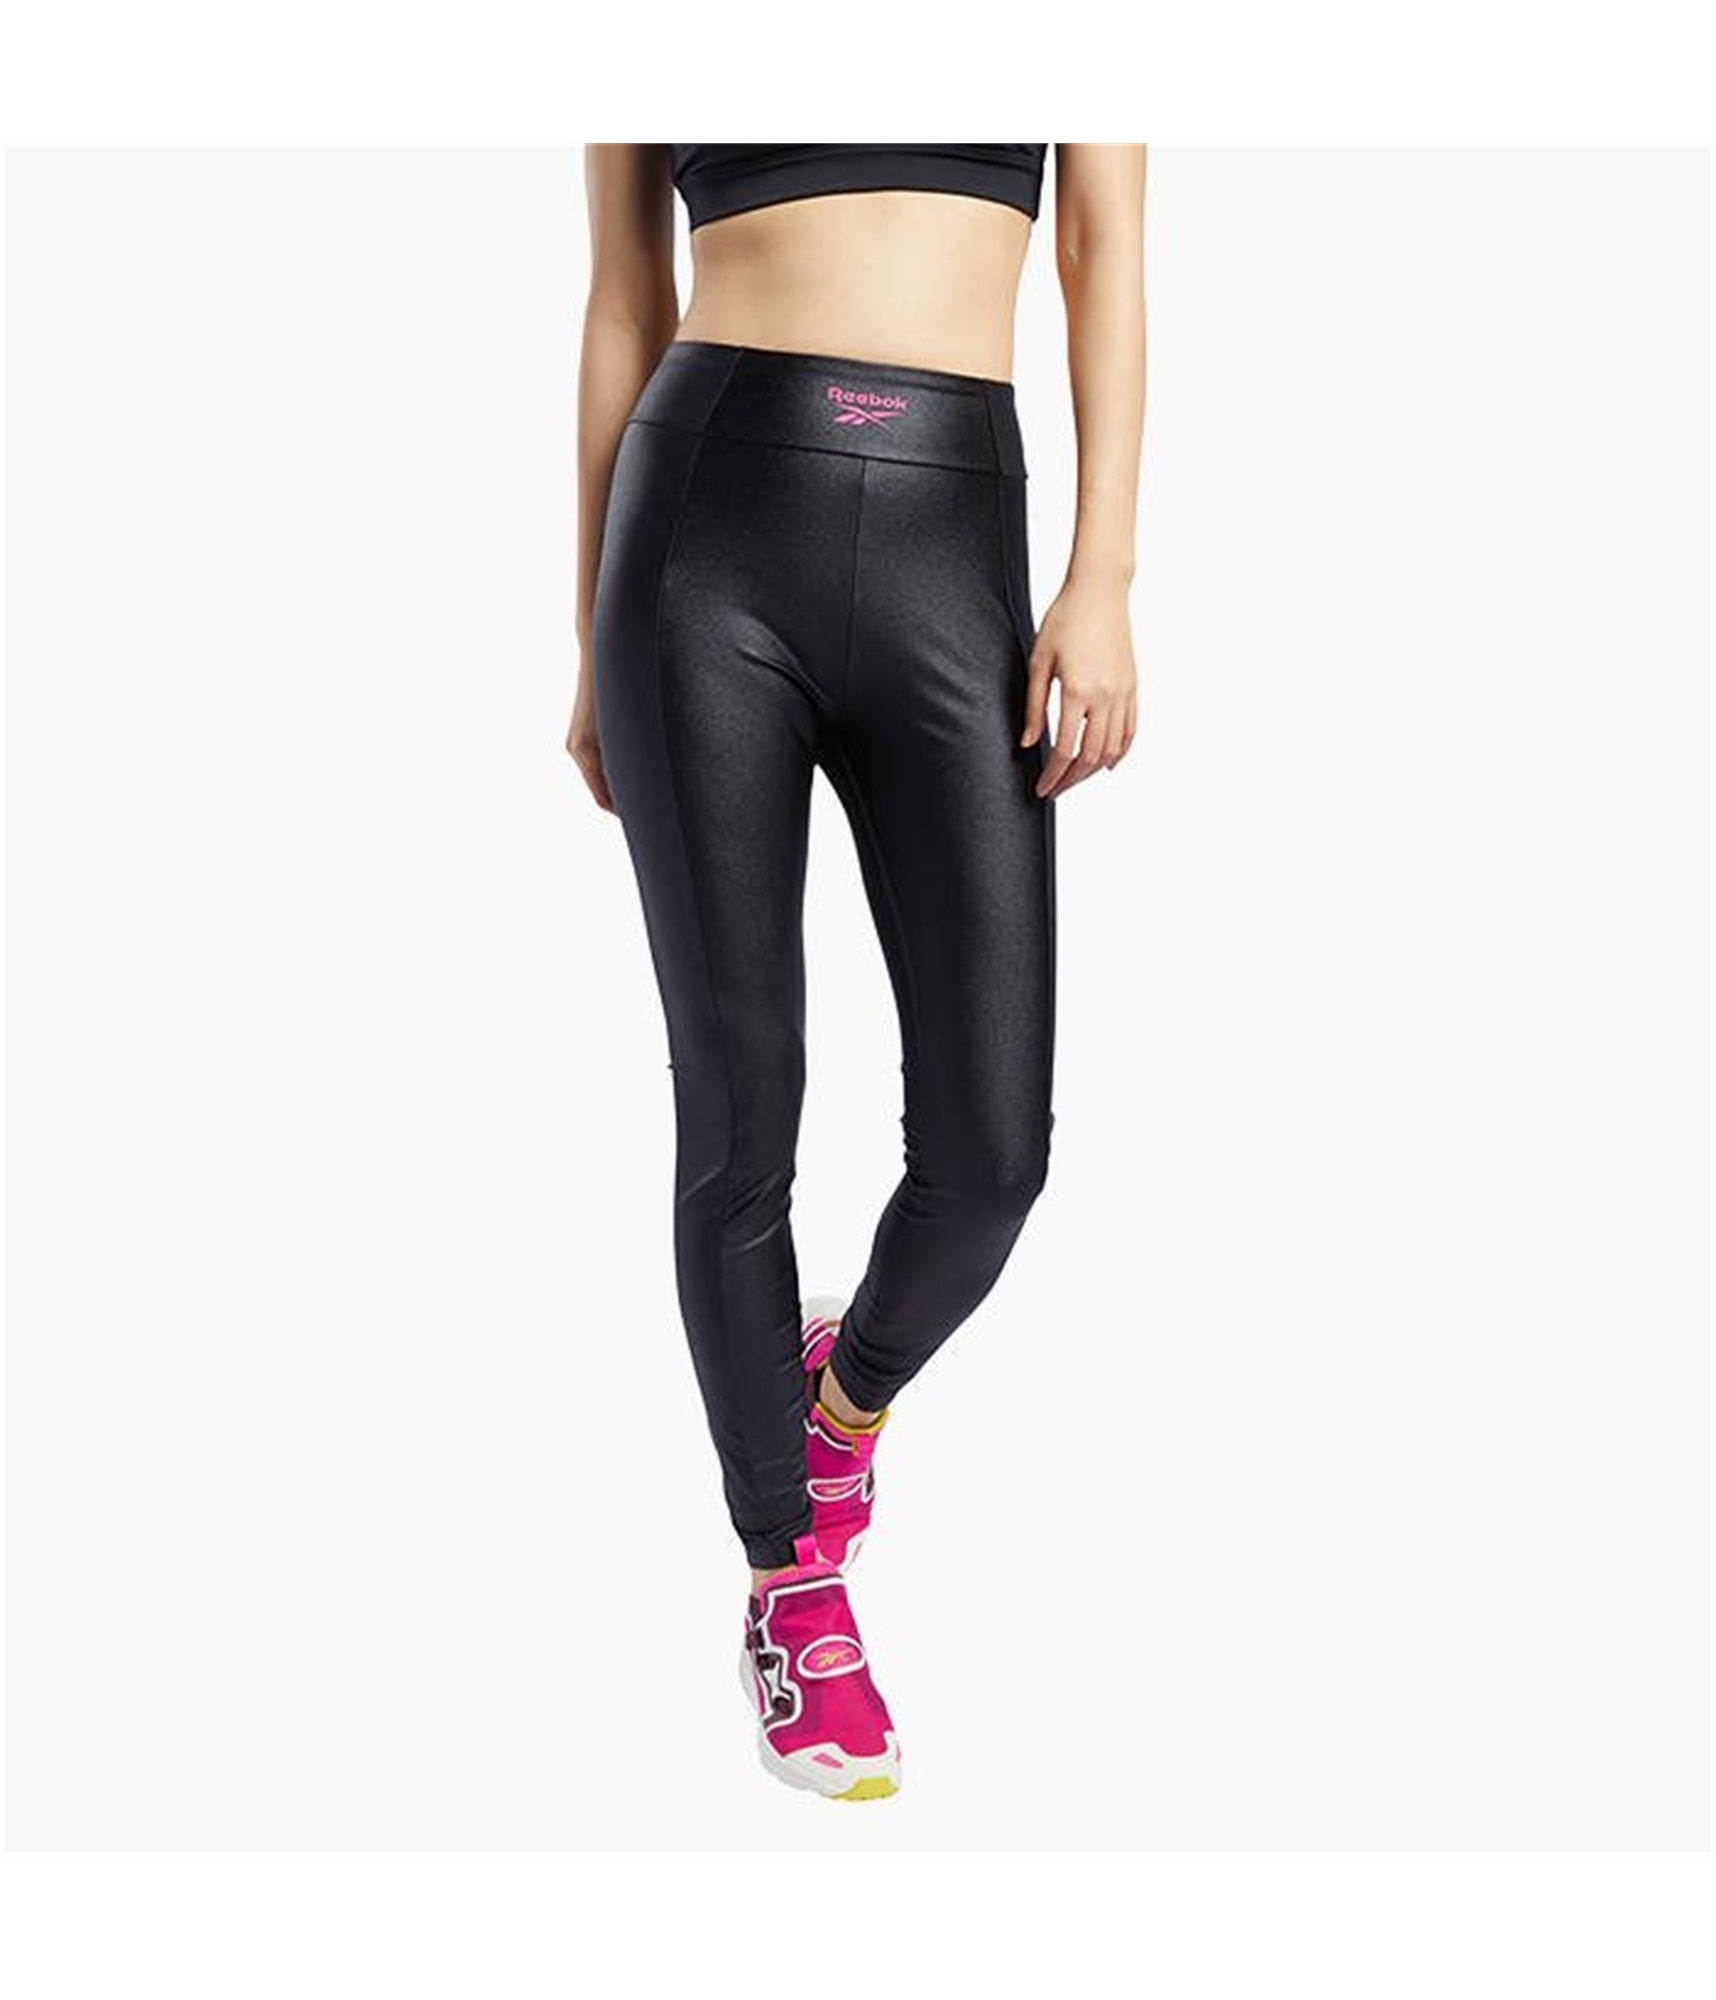 Buy a Wonder Woman Compression Pants | TagsWeekly.com, TW1